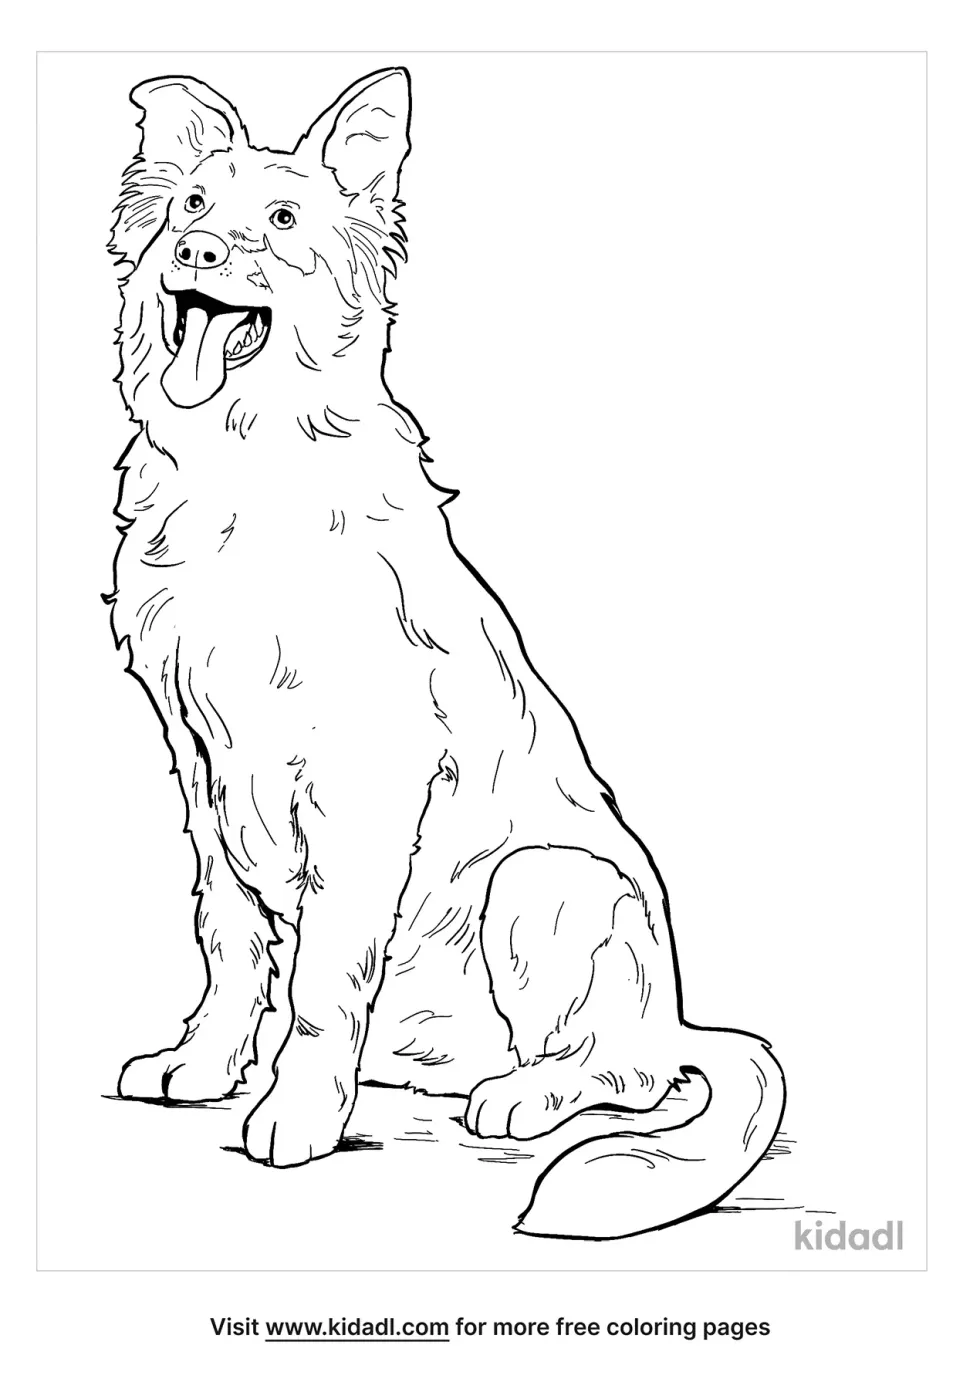 Shepherd Collie Mix Coloring Page